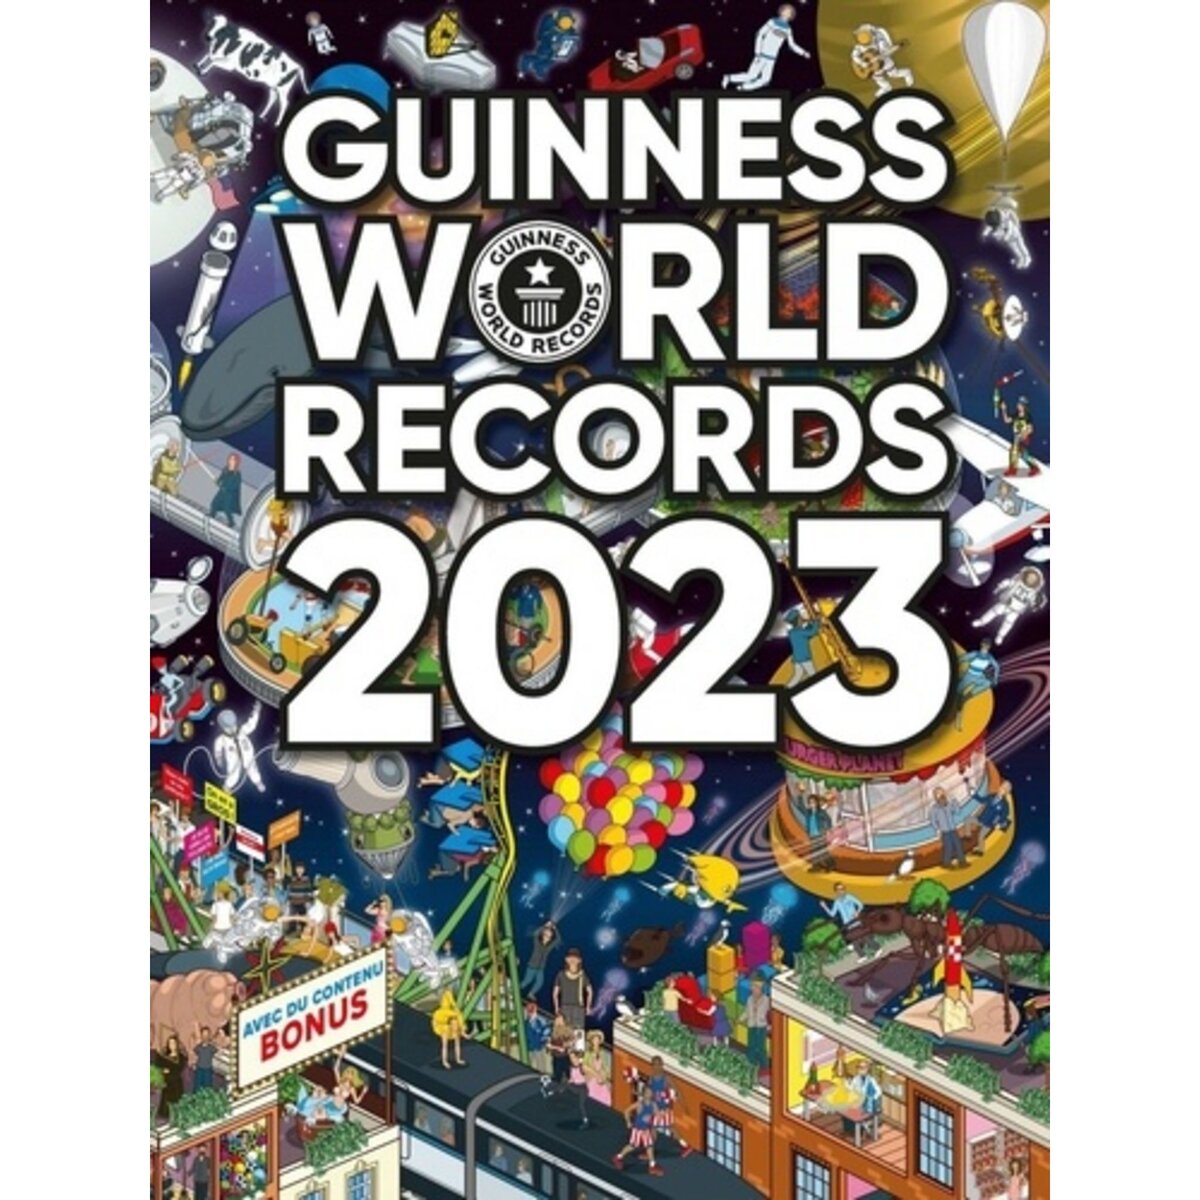  GUINNESS WORLD RECORDS. EDITION 2023, Guinness World Records